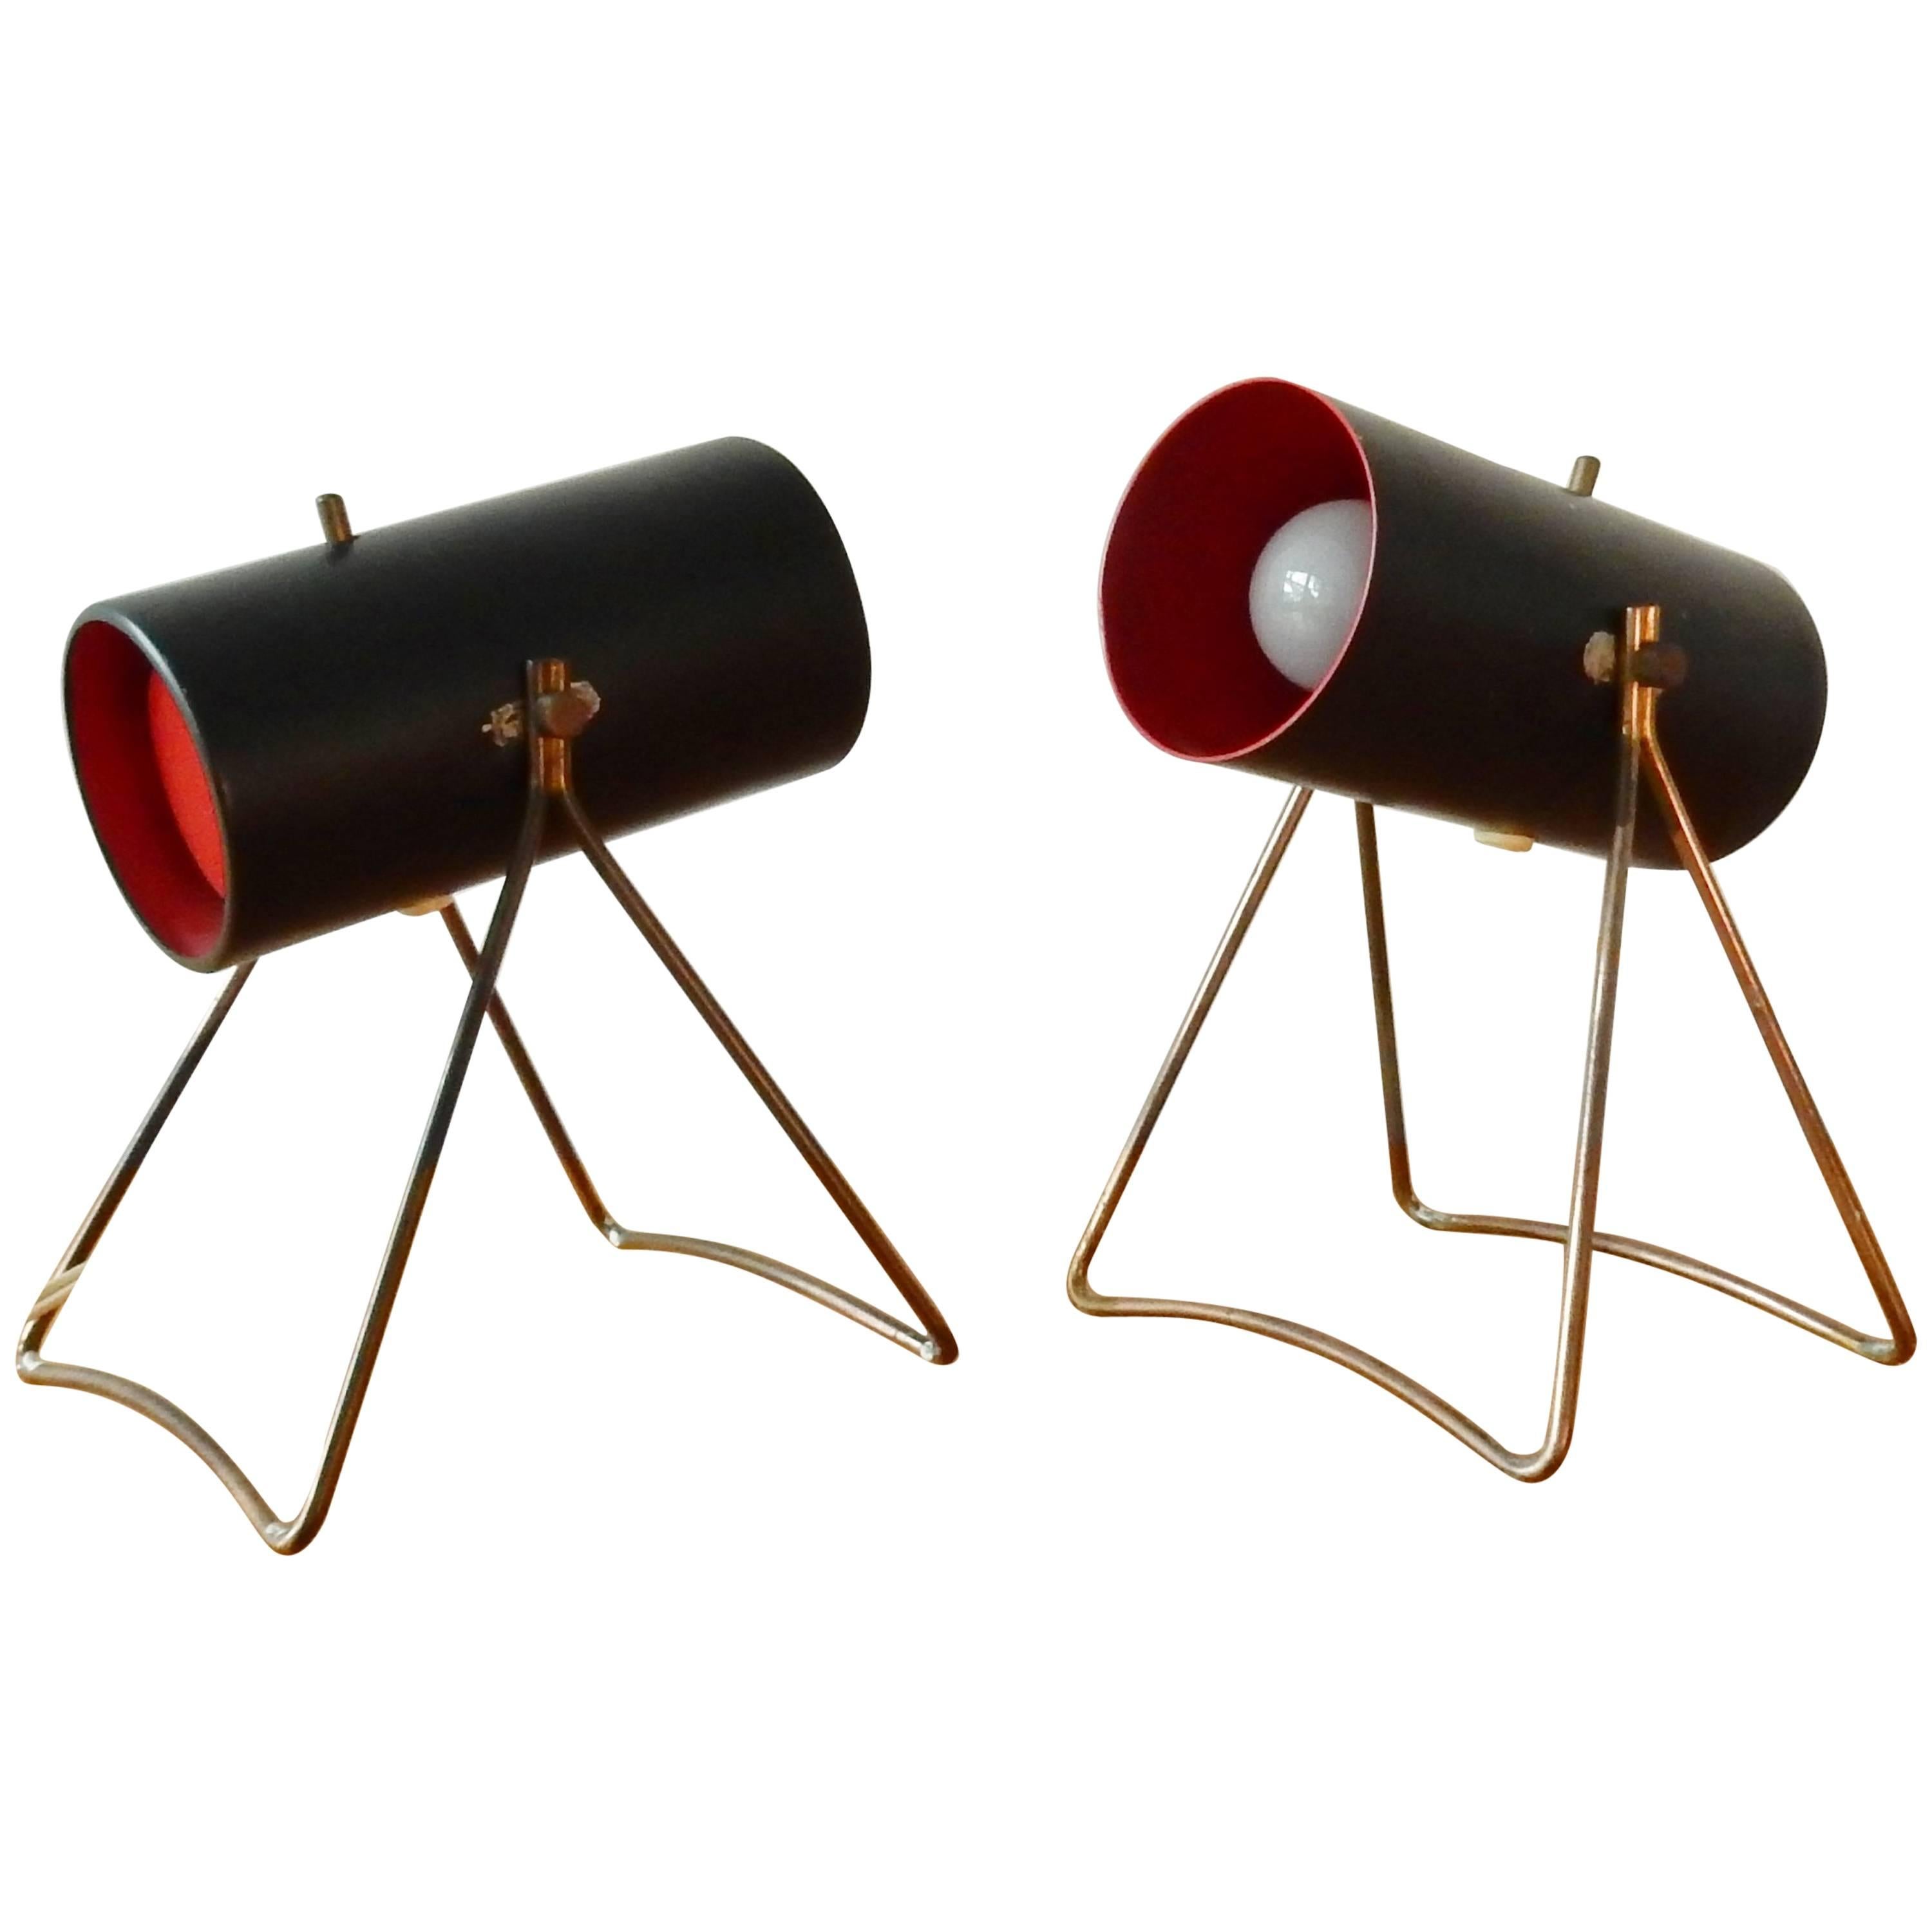 Set of Two Rare Table Lamps by Svend Aage Holm Sørensen for ASEA, Sweden, 1950s